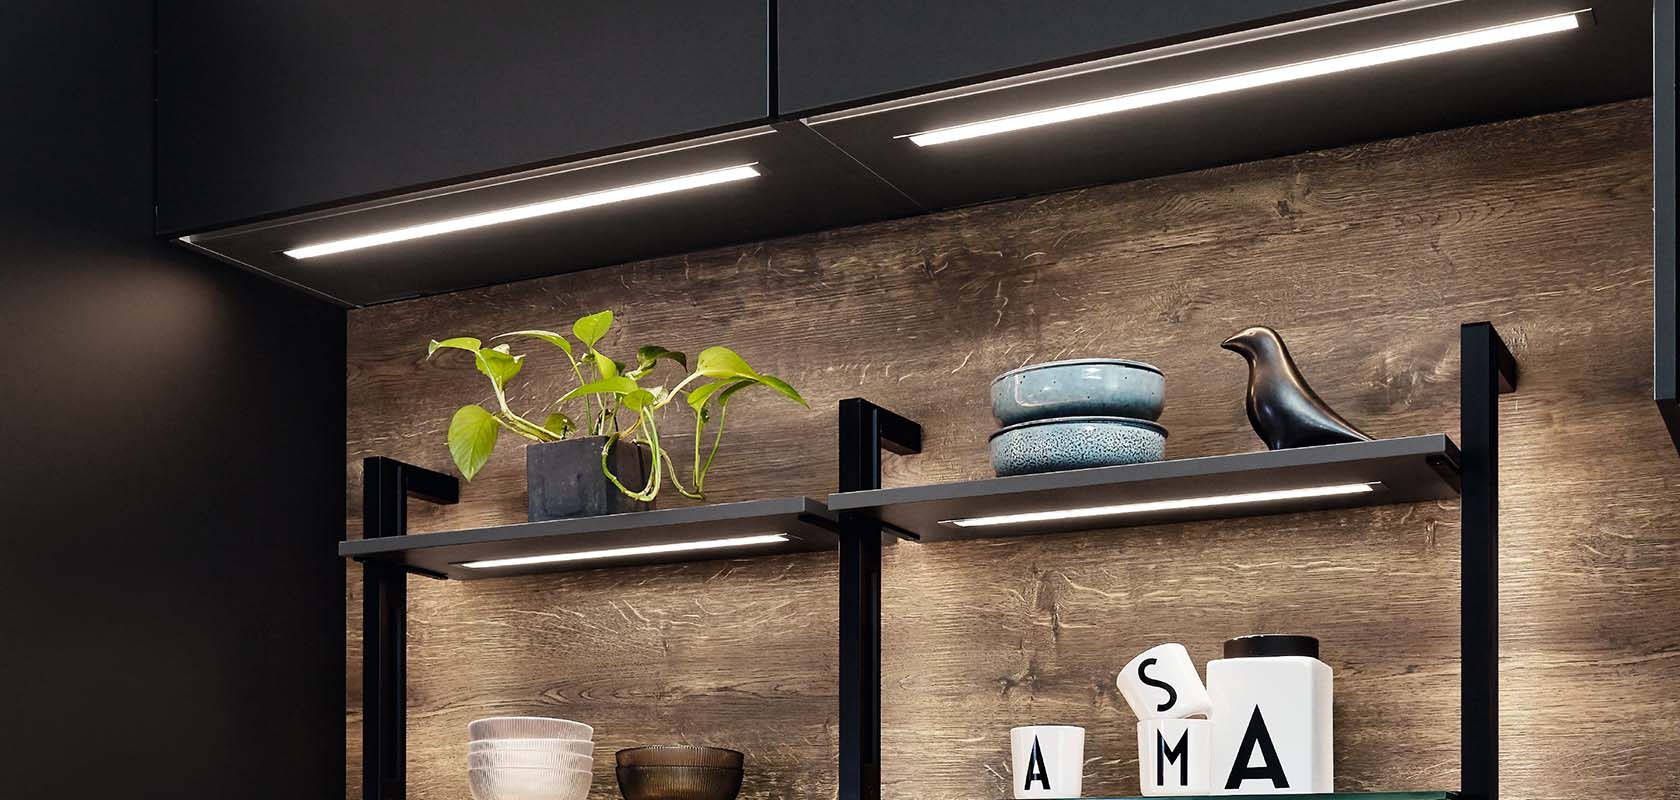 Pleasant atmosphere in your kitchen with lighting systems from nobilia.